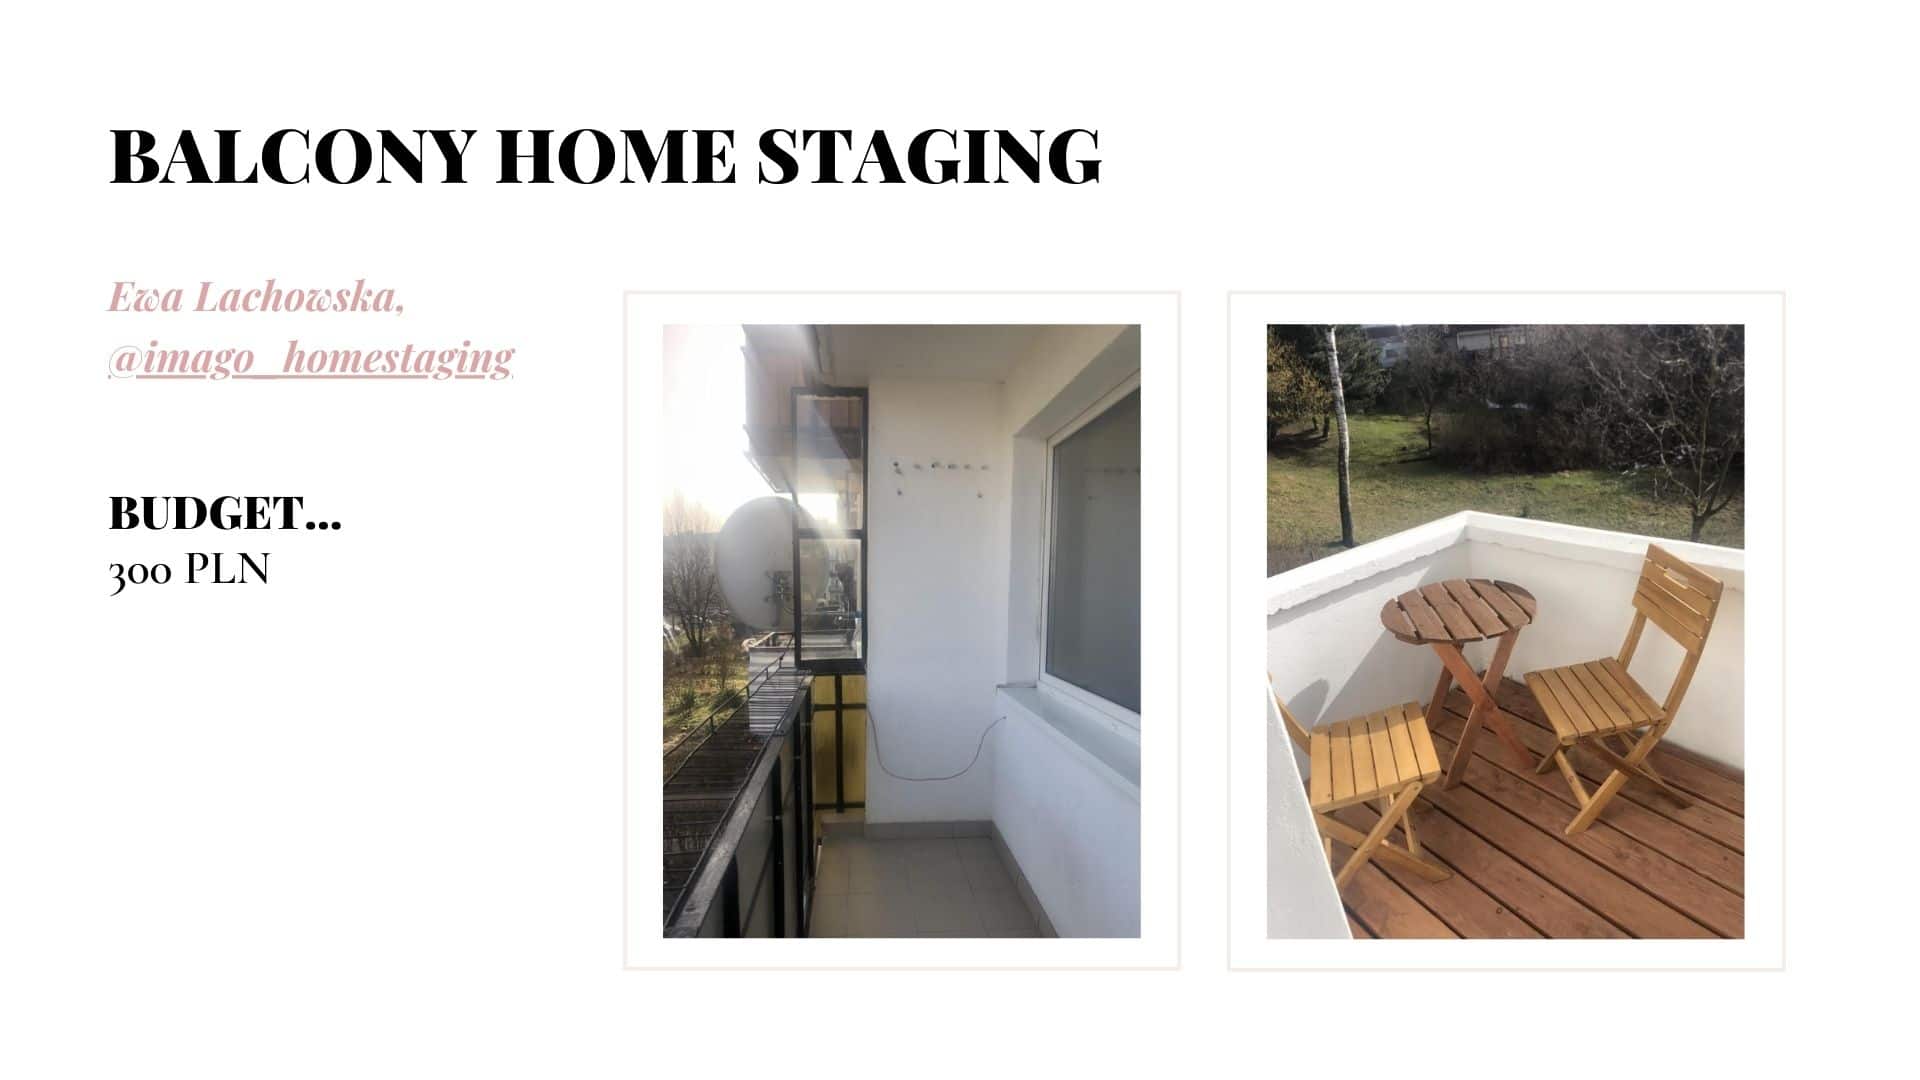 Balcony Home Staging Trends 2021